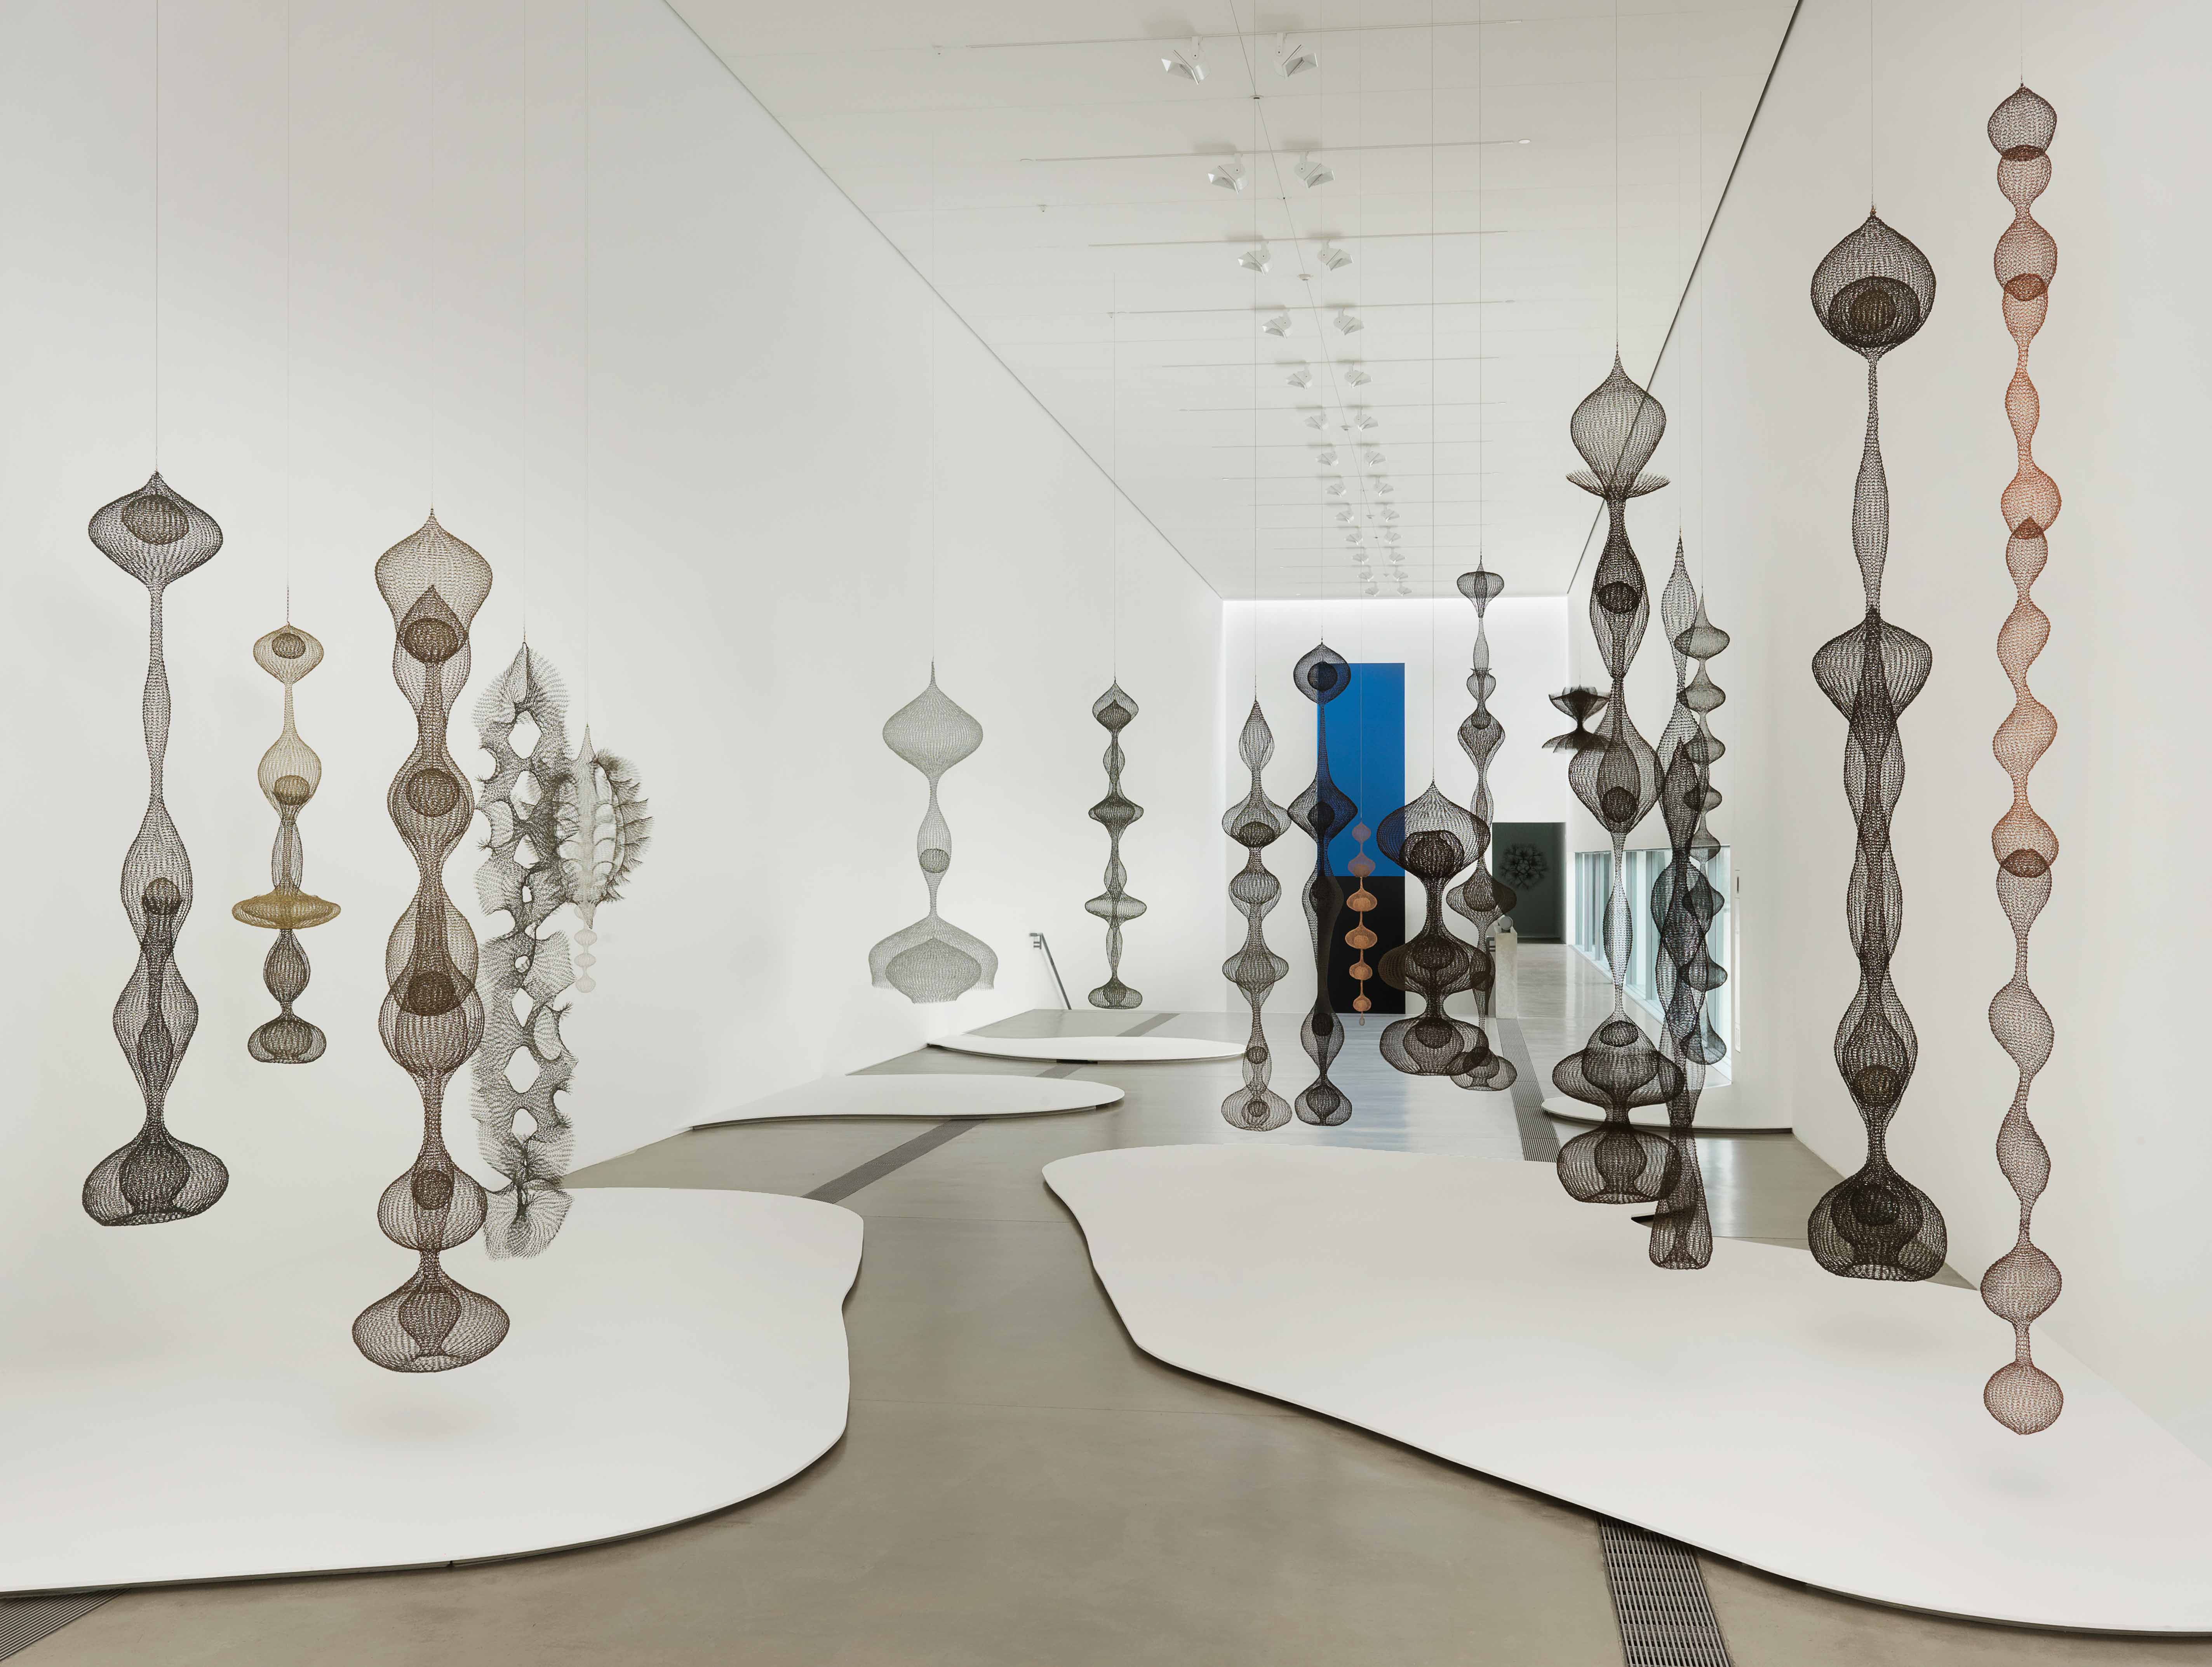 A view of Ruth Asawa's hanging wire sculptures in the Main Gallery.